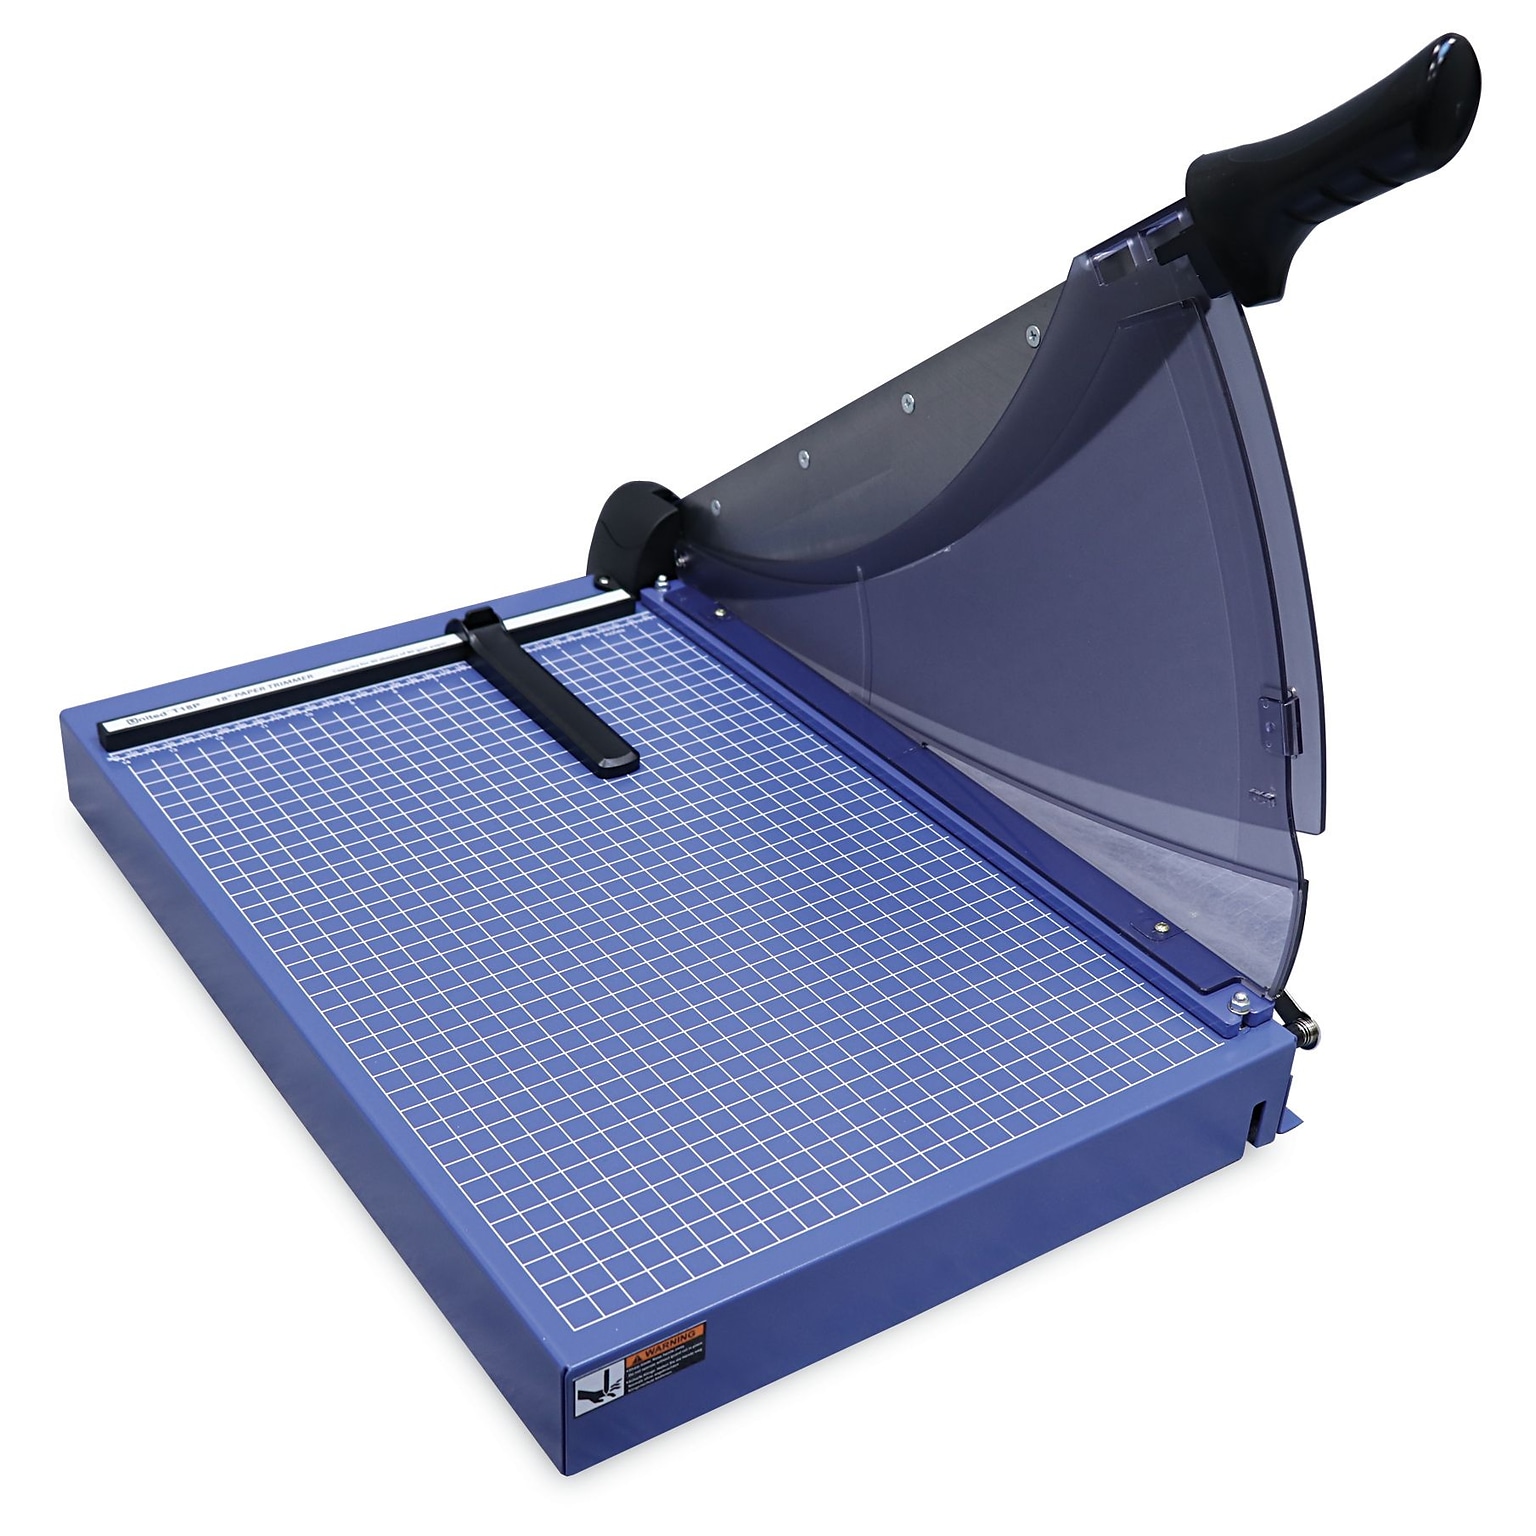 United Professional 18 Guillotine Paper Trimmer, Blue (T18P)